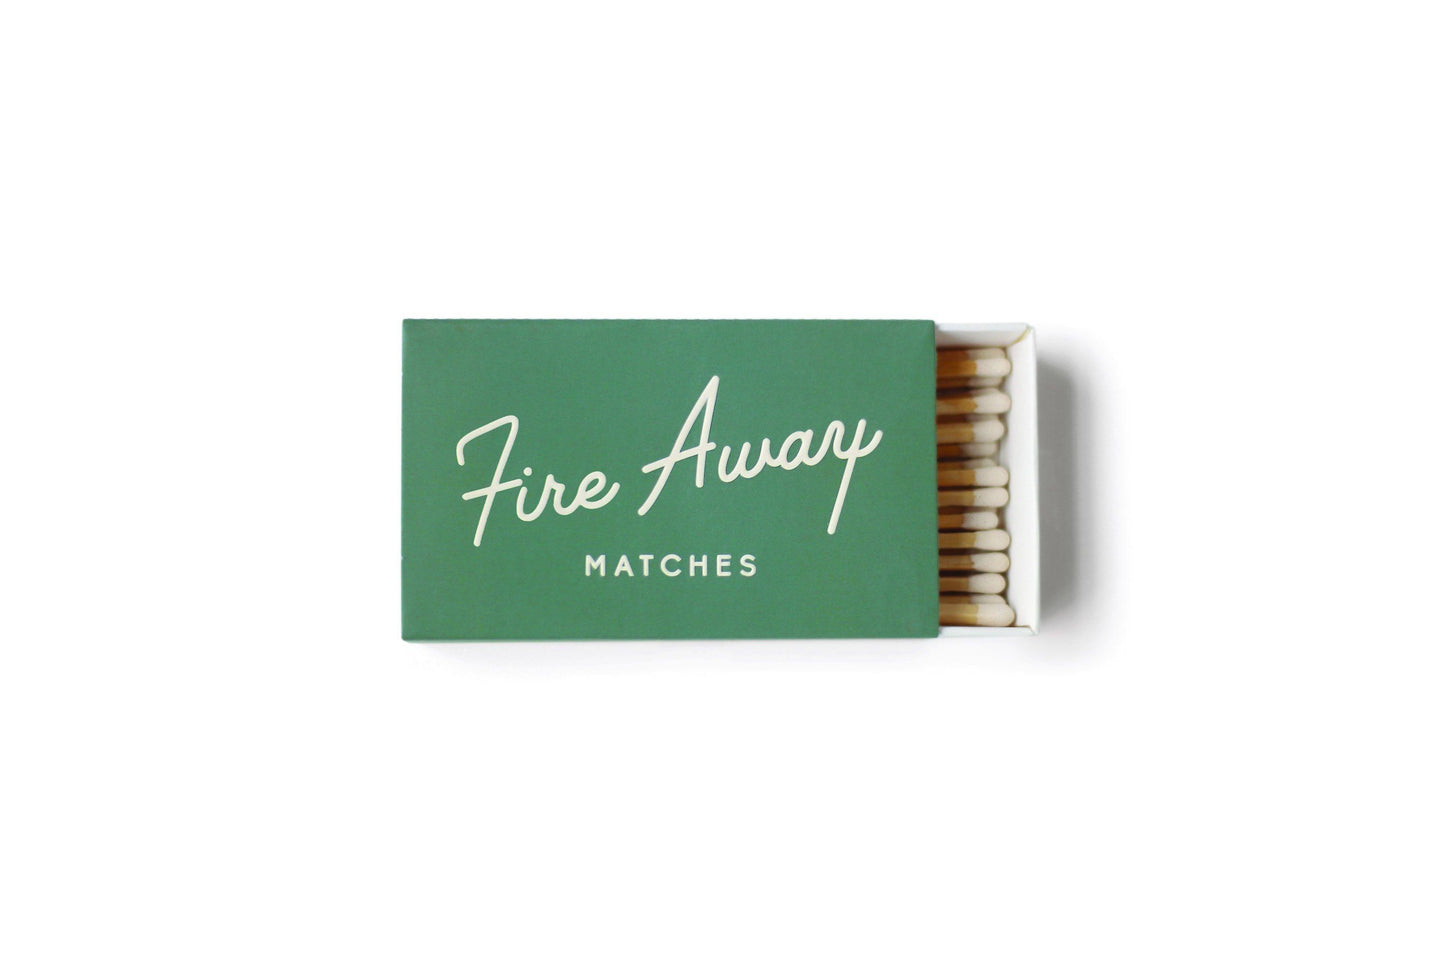 Matches - "Fire Away" - green colored box